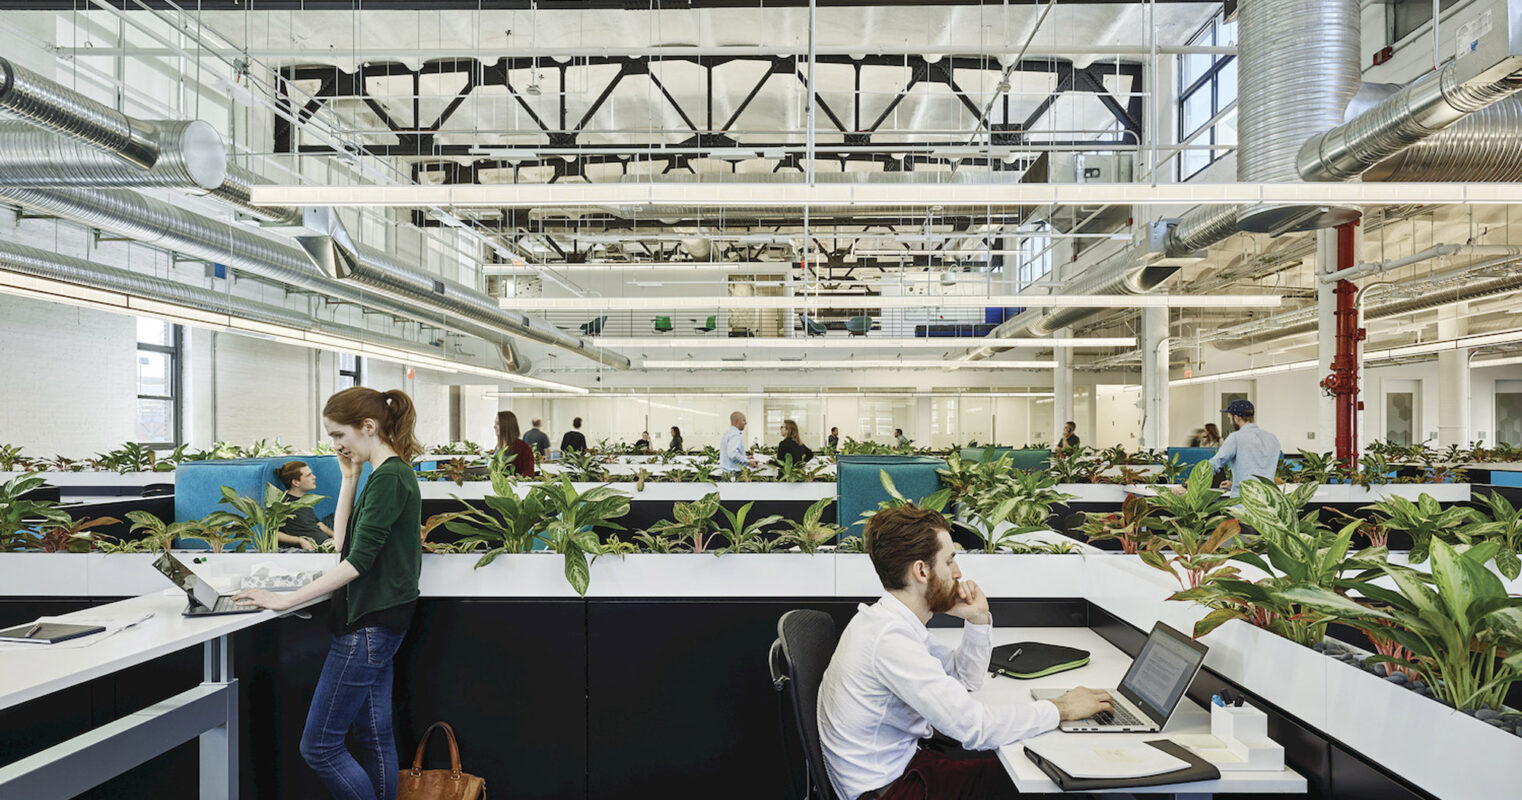 Open-plan office space with industrial aesthetic, featuring exposed ceiling pipes, abundant natural light, and a green plant divider creating a biophilic environment. Employees work at communal benches, enhancing interaction and collaboration.